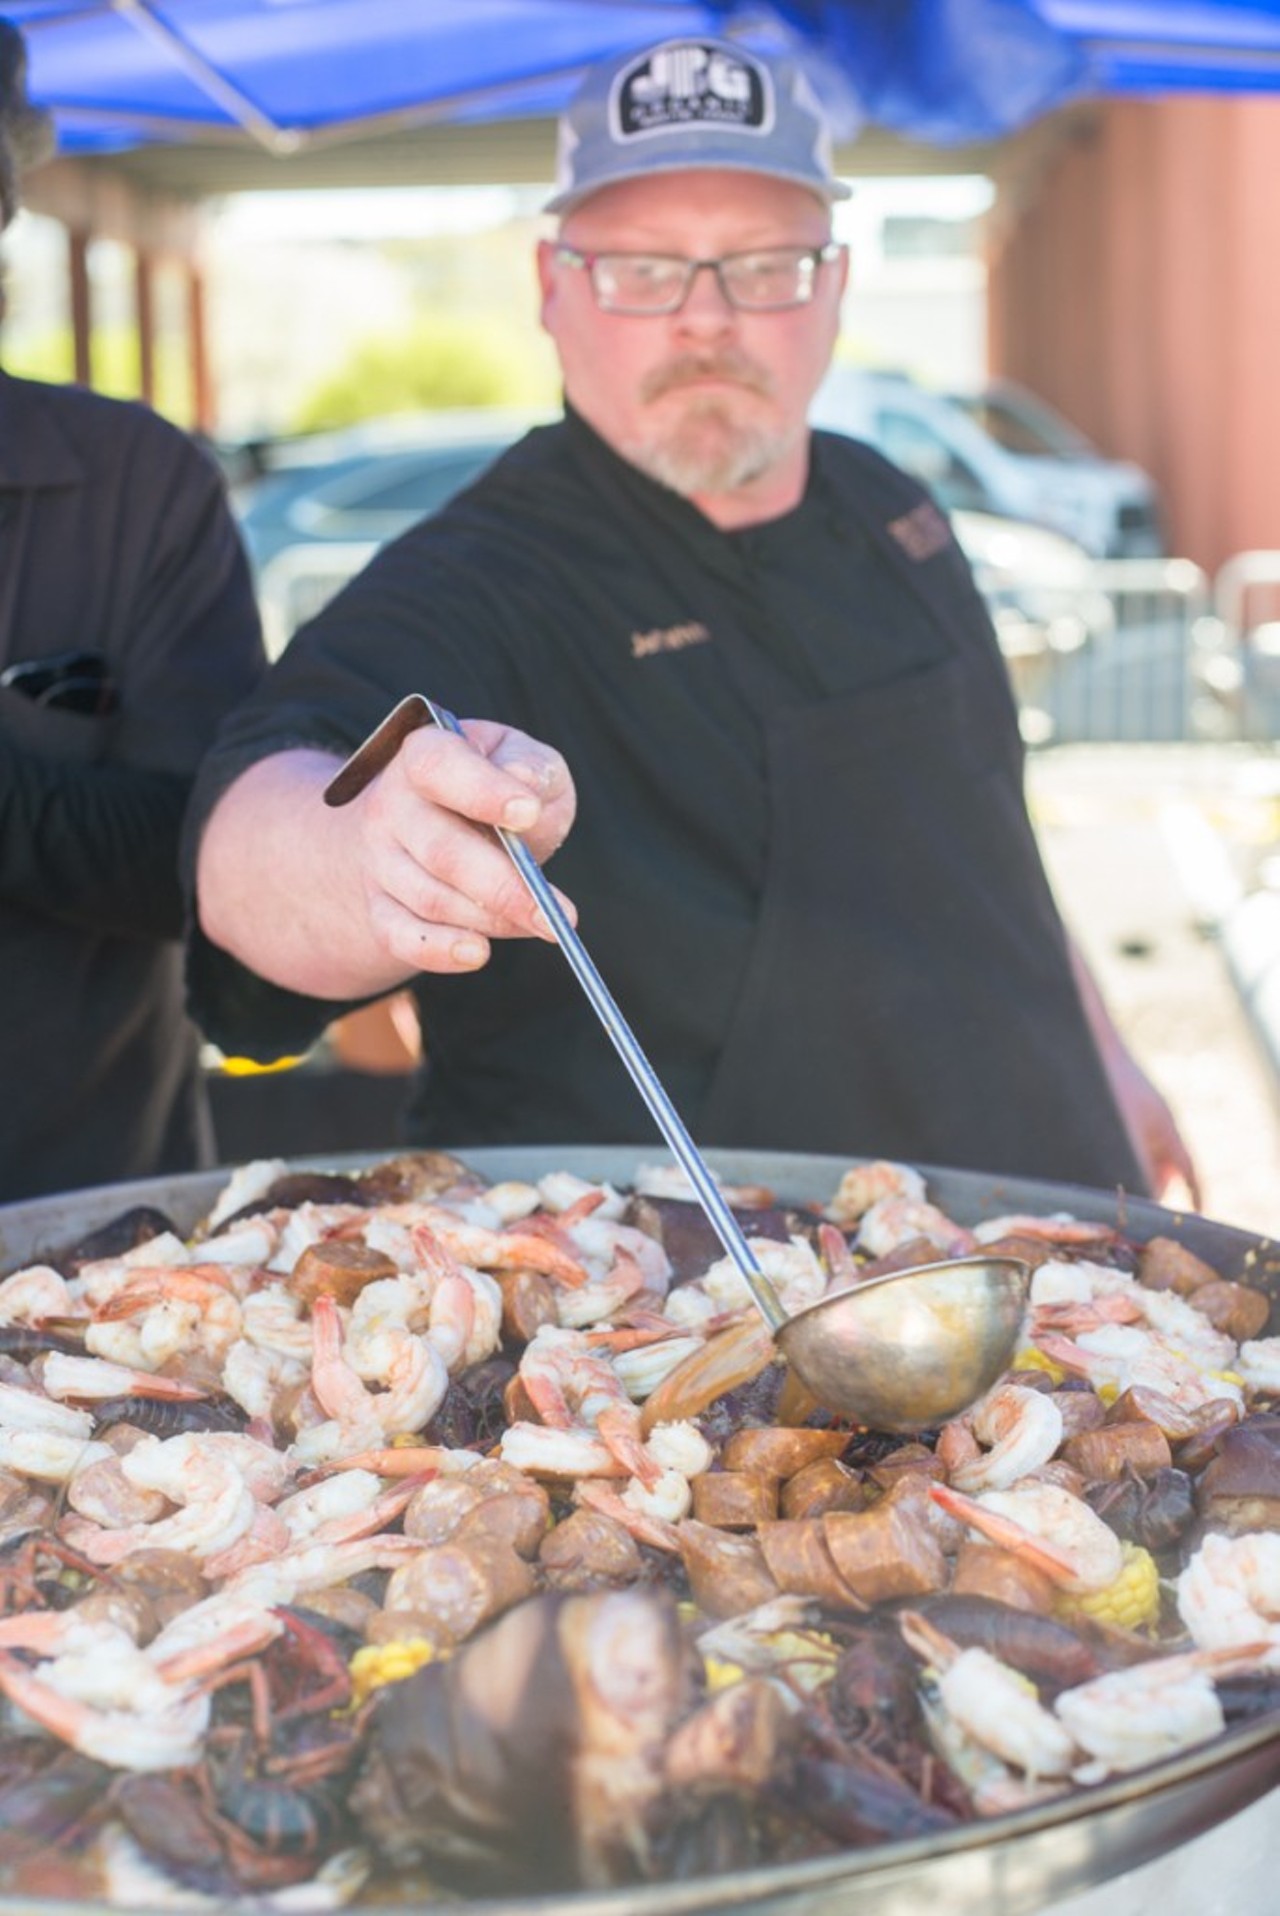 Photos From the 7th Annual Paella Challenge